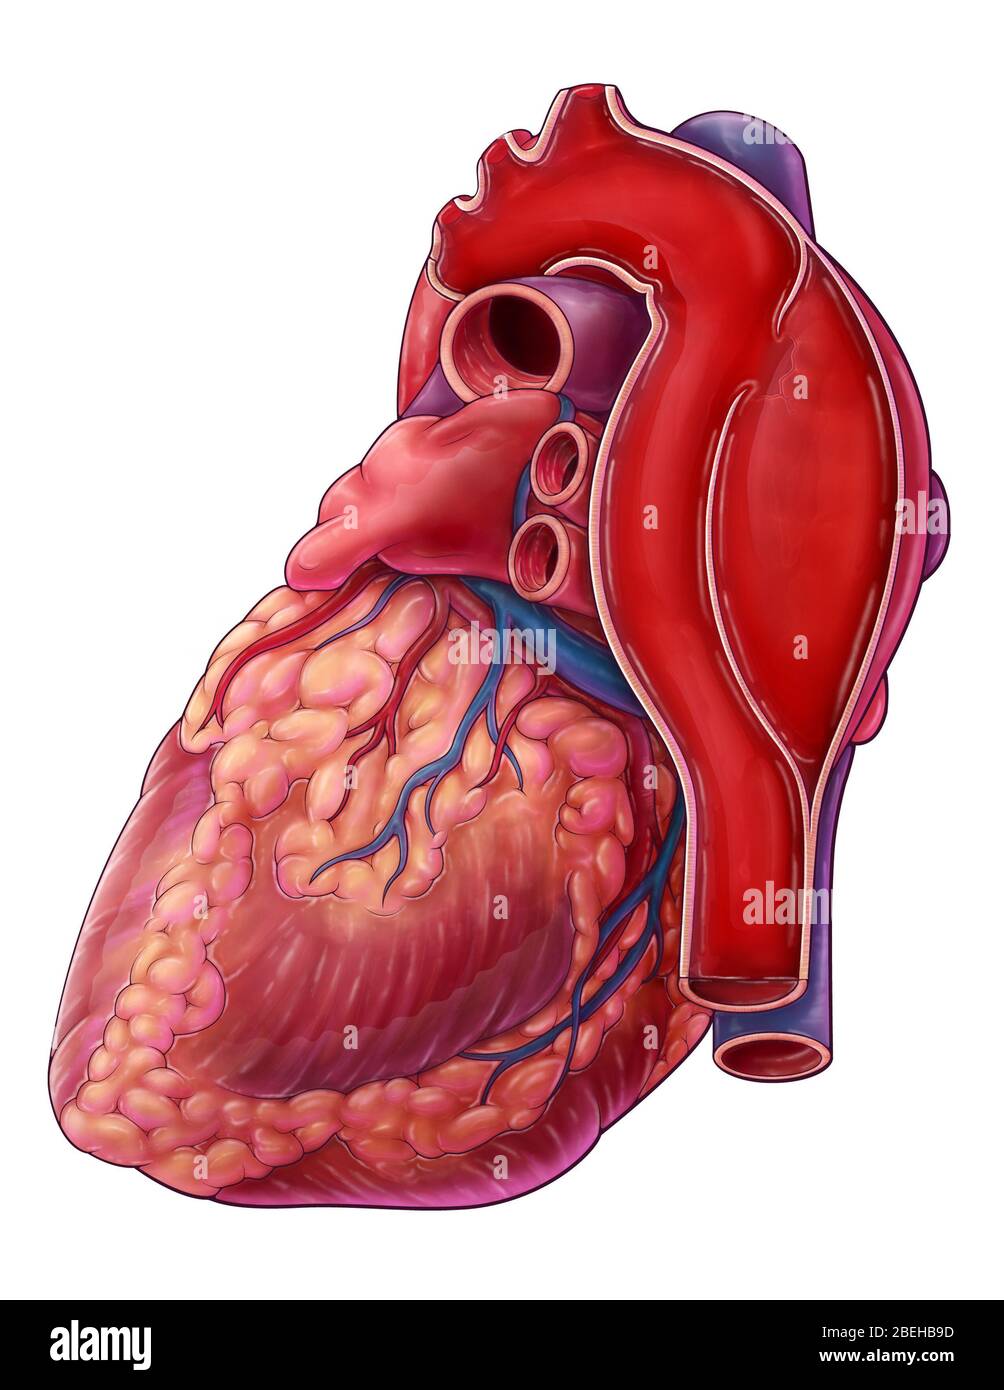 Aortic Dissection, Illustration Stock Photo